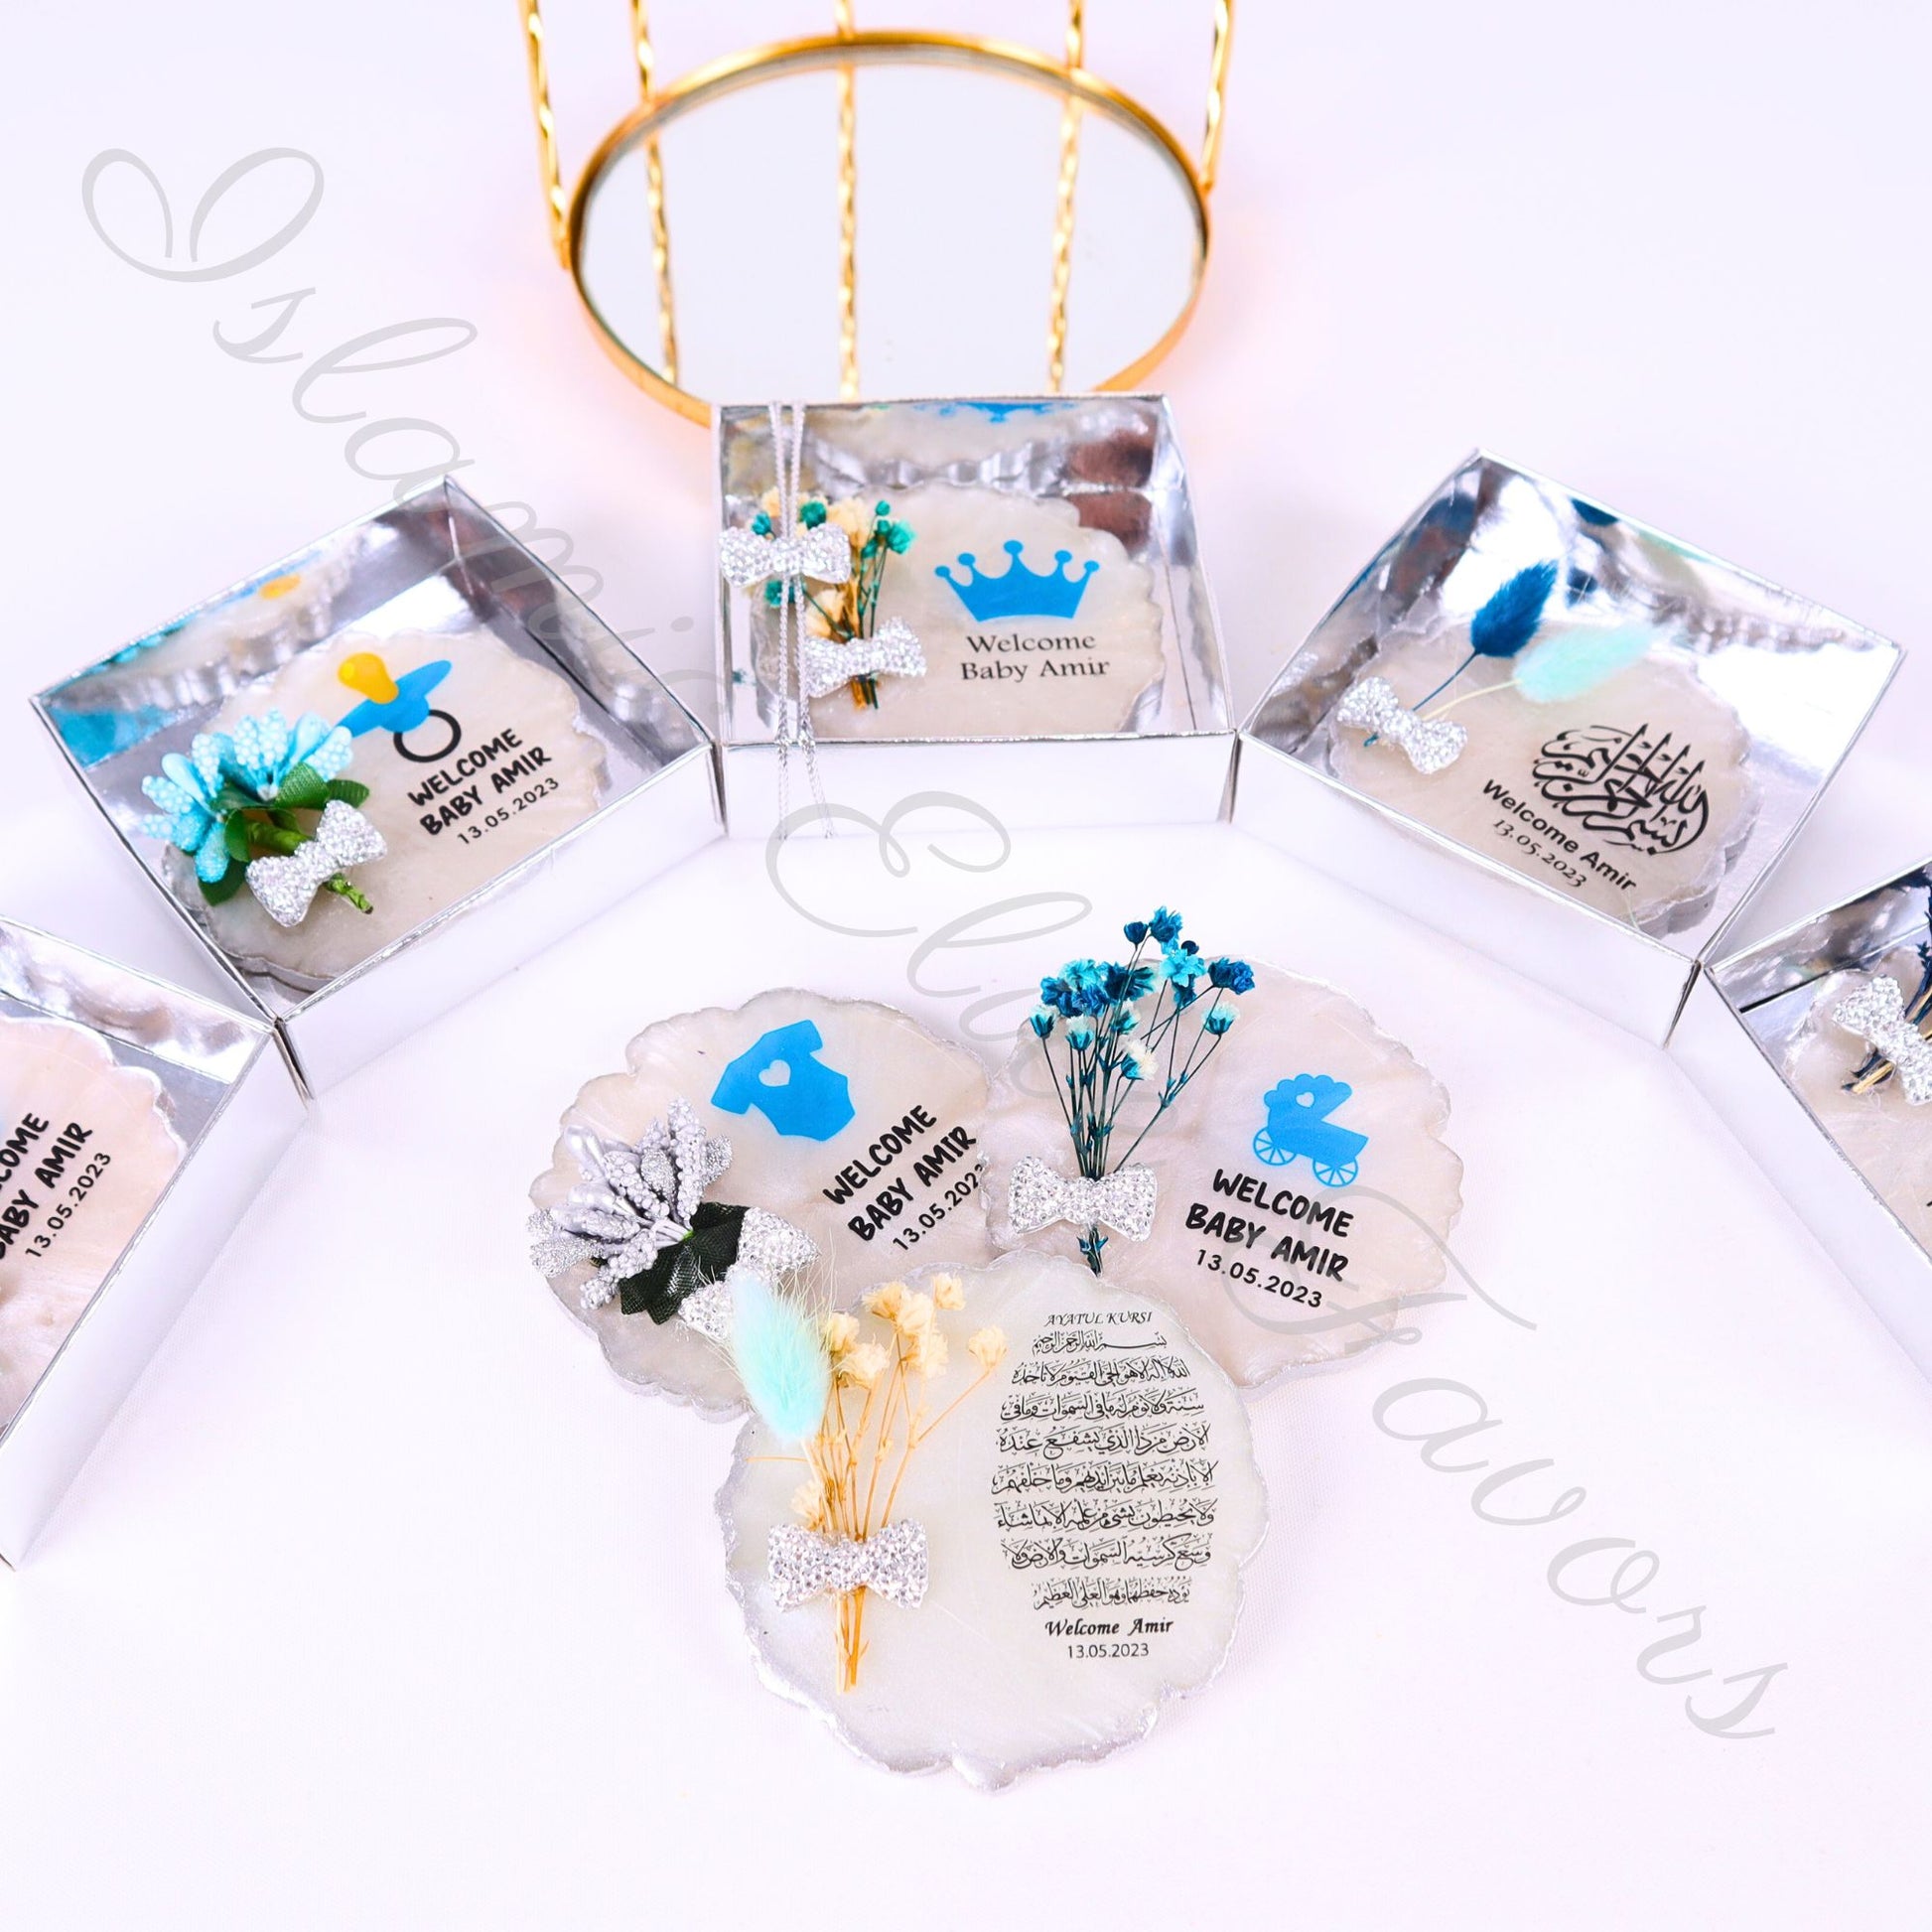 Personalized Baby Shower Favors Epoxy Magnet for Baby Boy Silver Theme - Islamic Elite Favors is a handmade gift shop offering a wide variety of unique and personalized gifts for all occasions. Whether you're looking for the perfect Ramadan, Eid, Hajj, wedding gift or something special for a birthday, baby shower or anniversary, we have something for everyone. High quality, made with love.